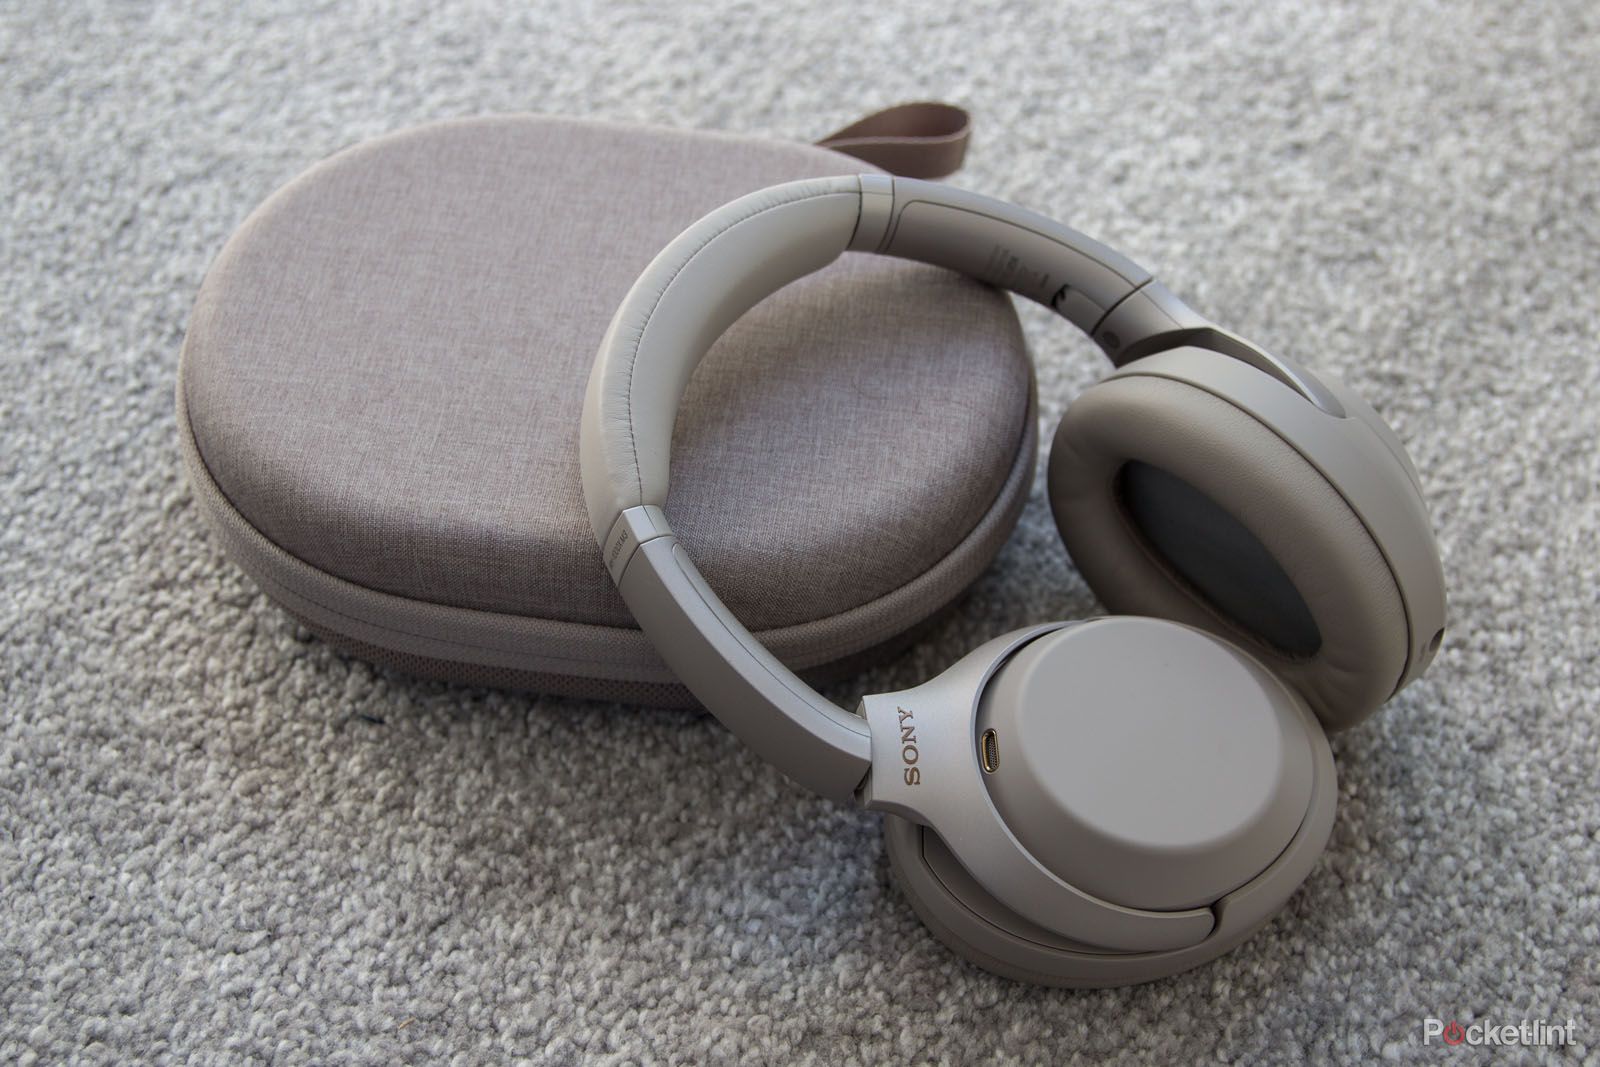 Sony WH-1000XM4 headphones appear in Walmart listing image 1